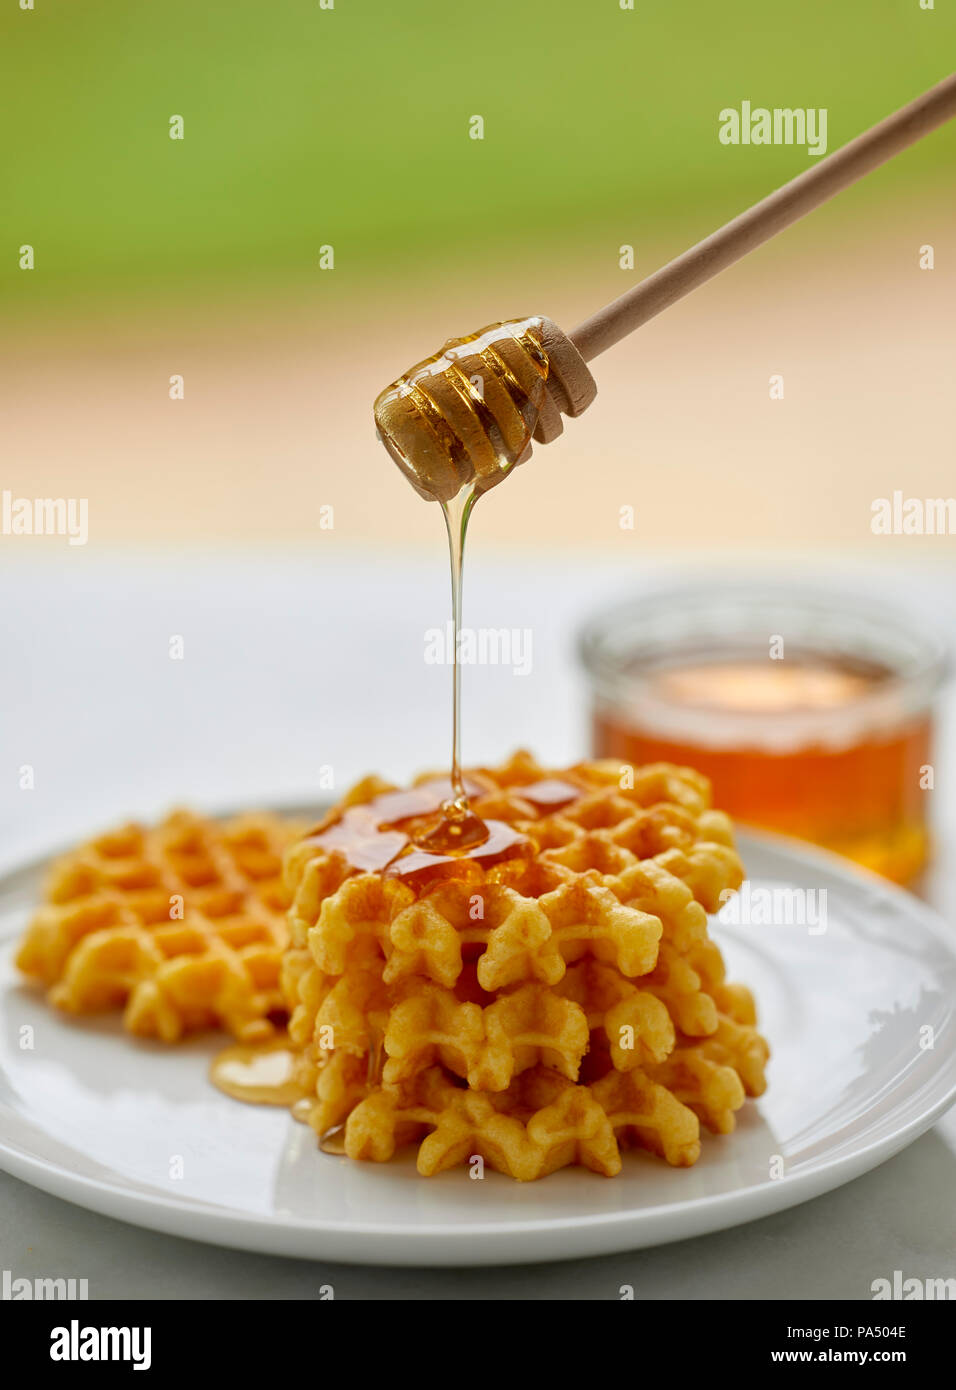 Honey in a jar with wooden dipper Stock Photo